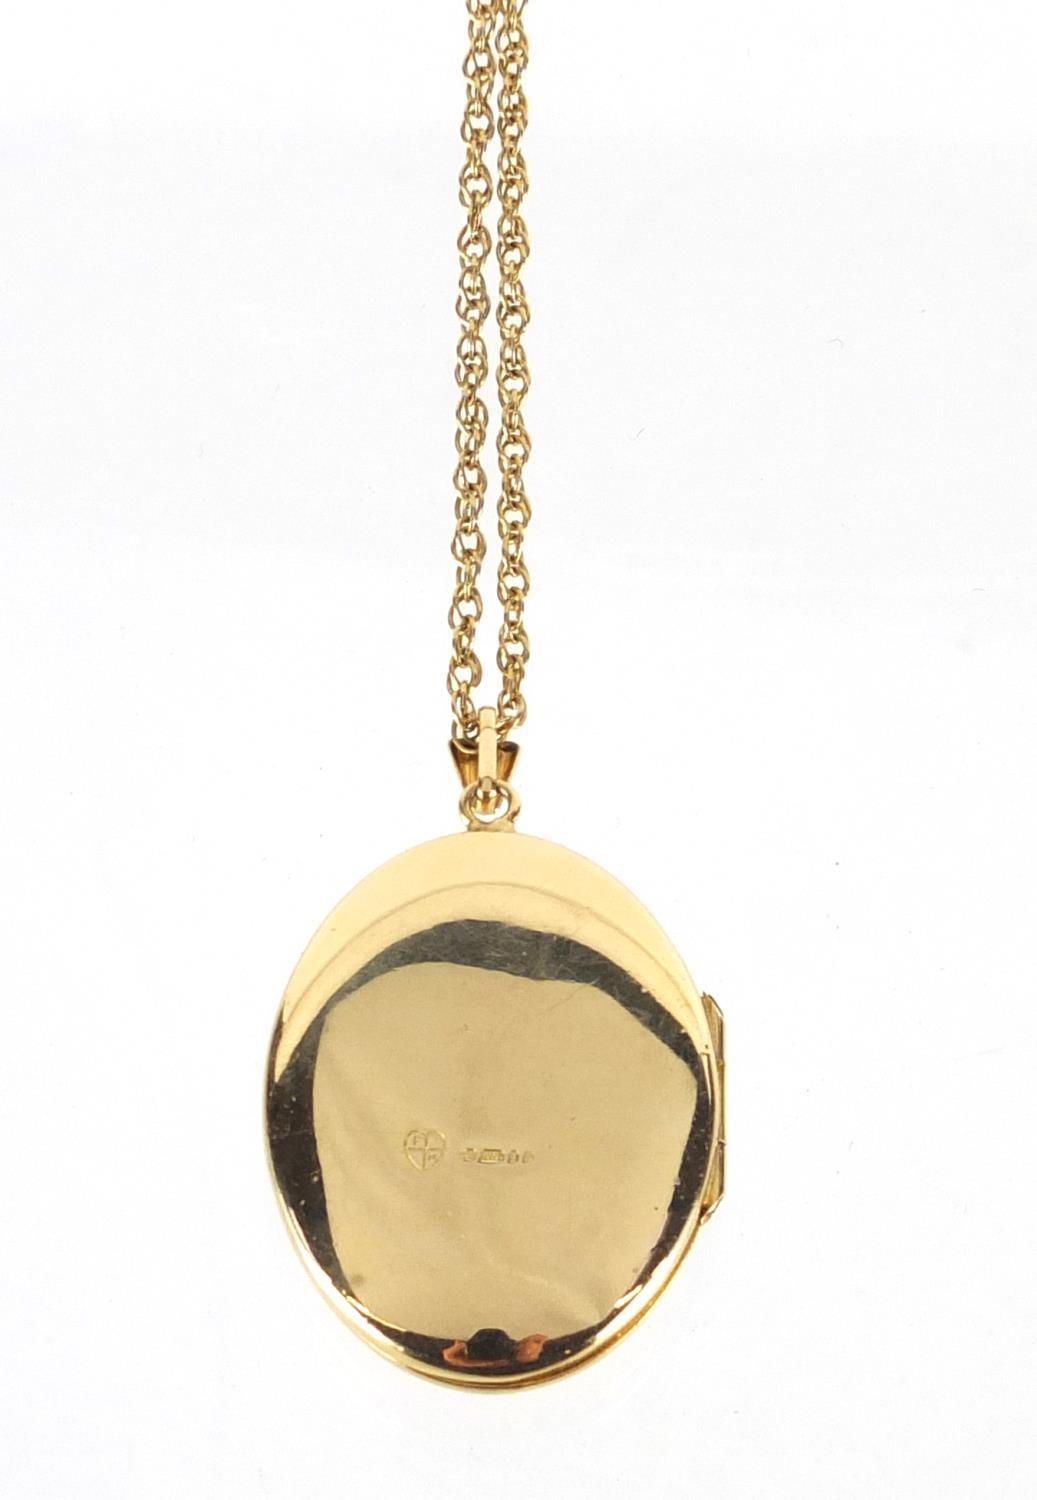 Oval 9ct gold locket set with a garnet on a 9ct gold necklace, the locket 4cm in length, approximate - Image 3 of 4